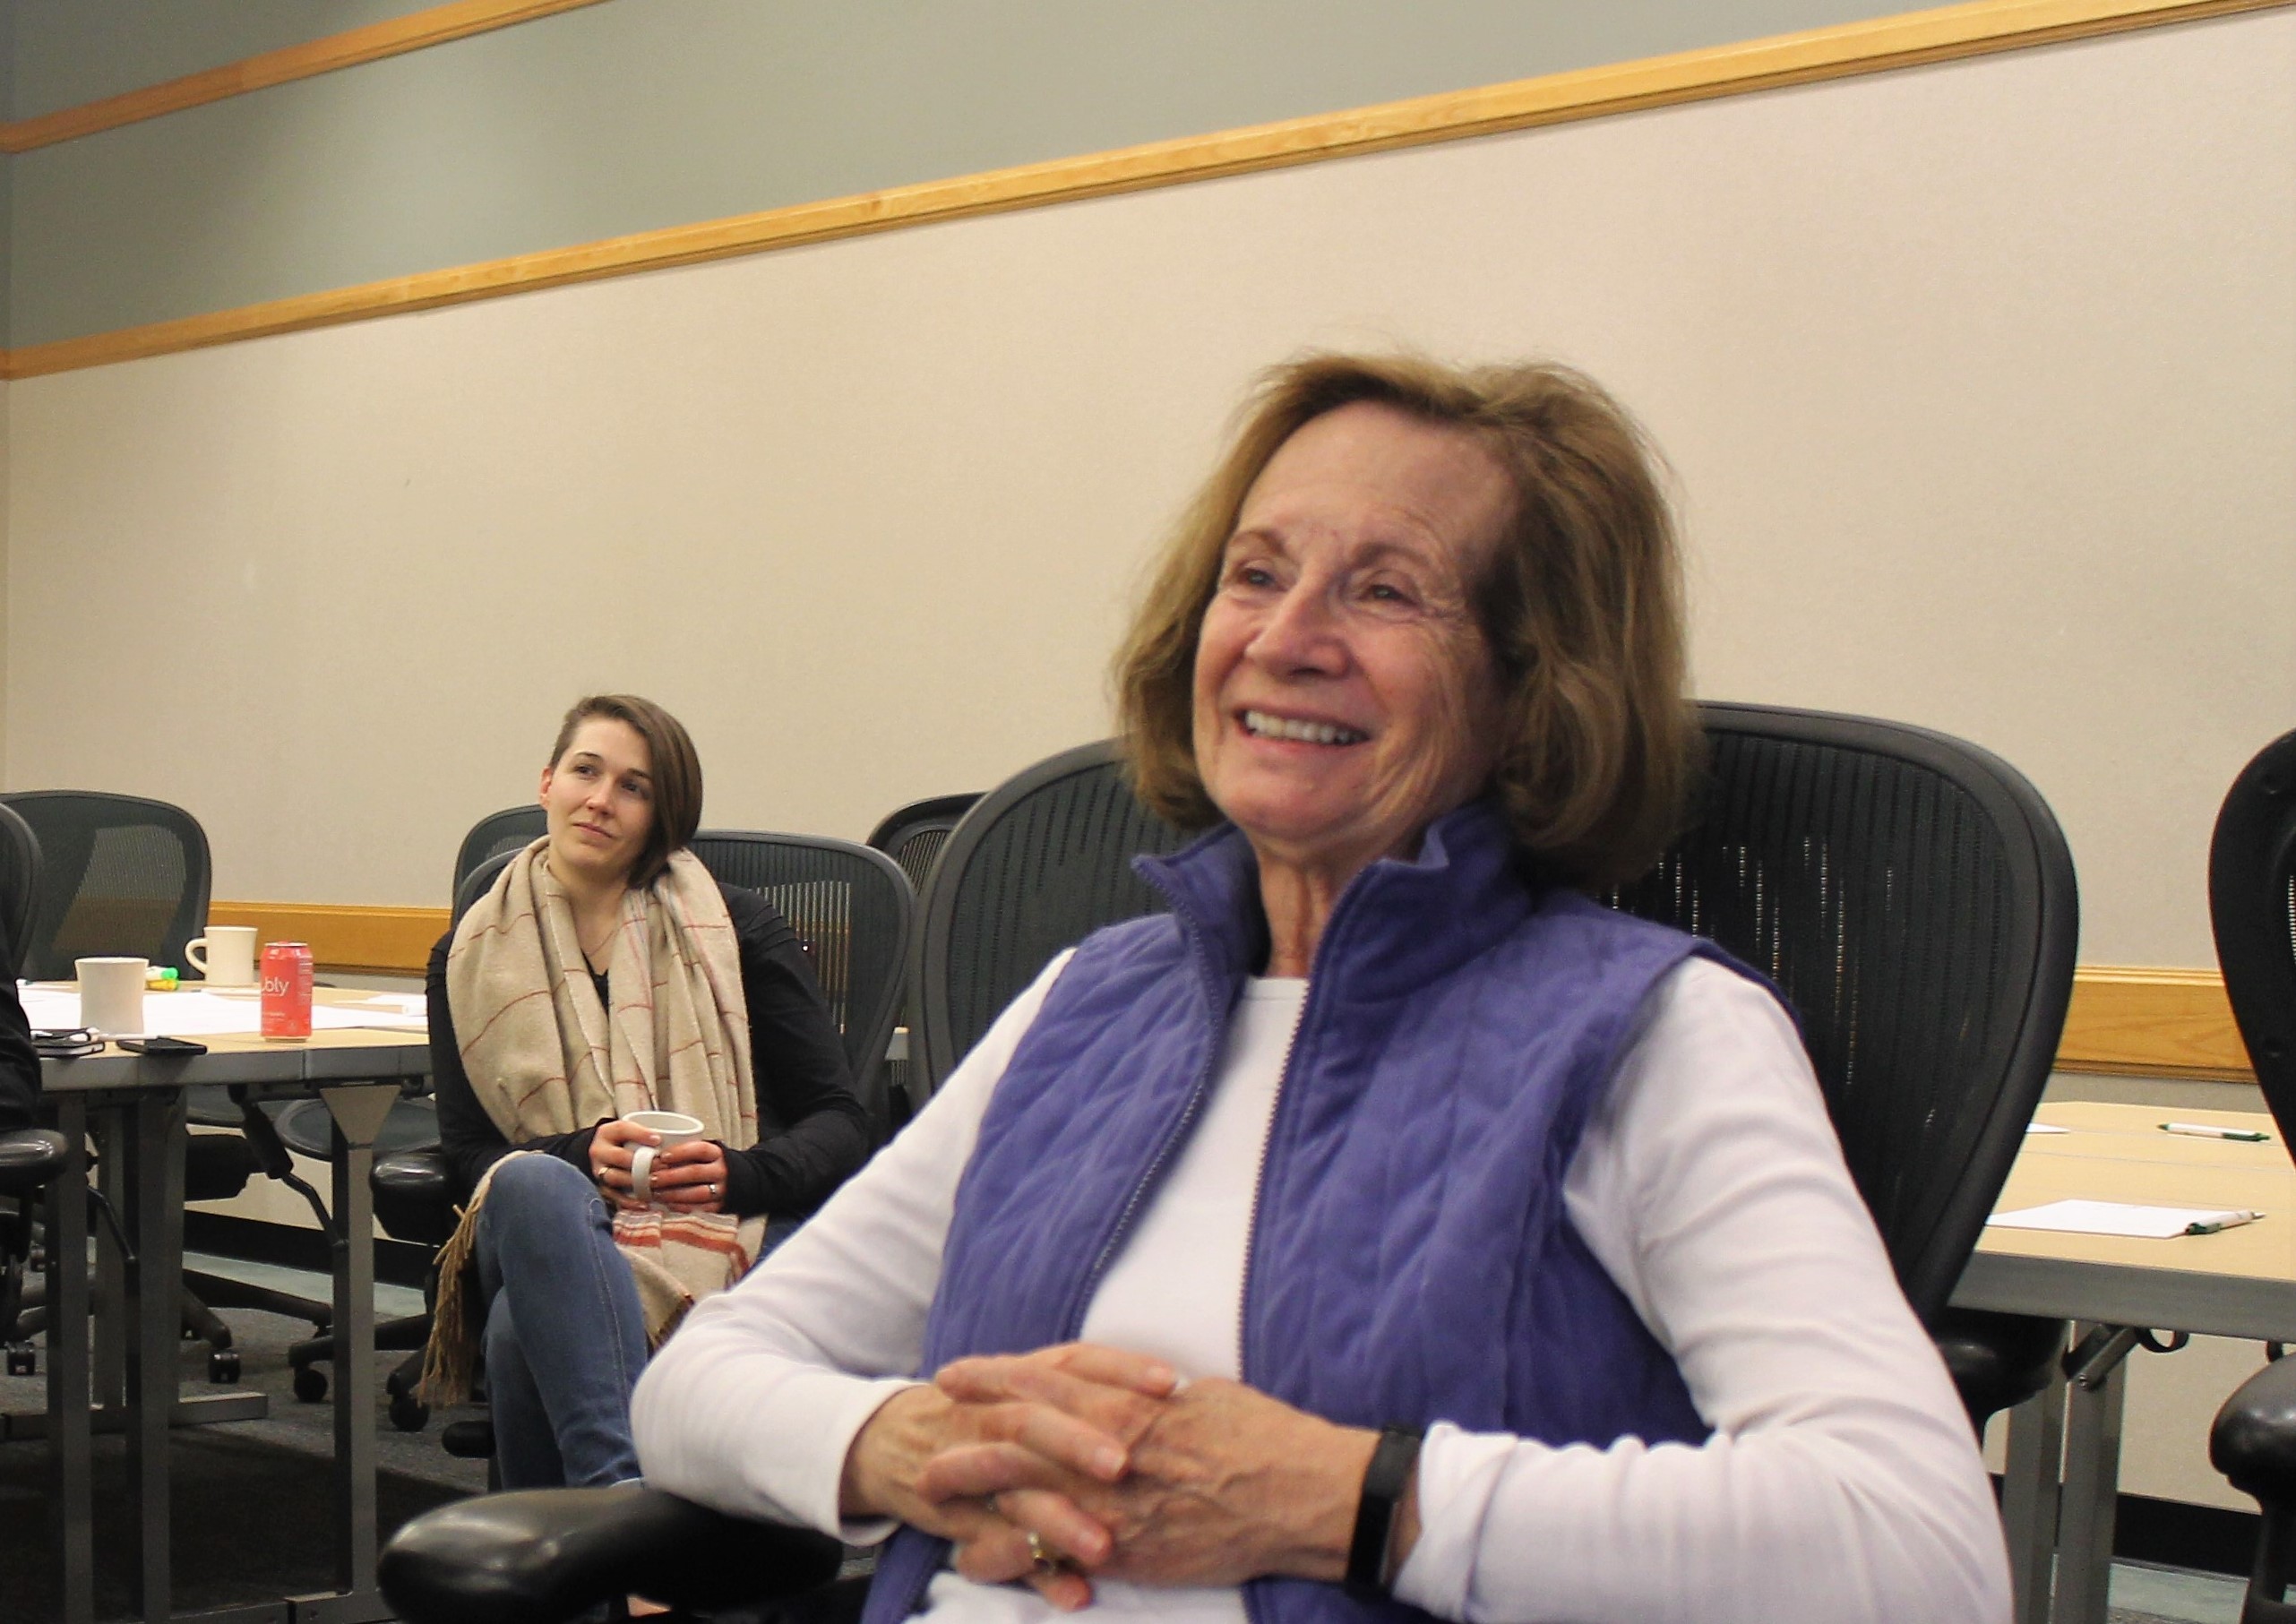 Segal Founder Phyllis Segal laughing during Fellow in Action Presentation